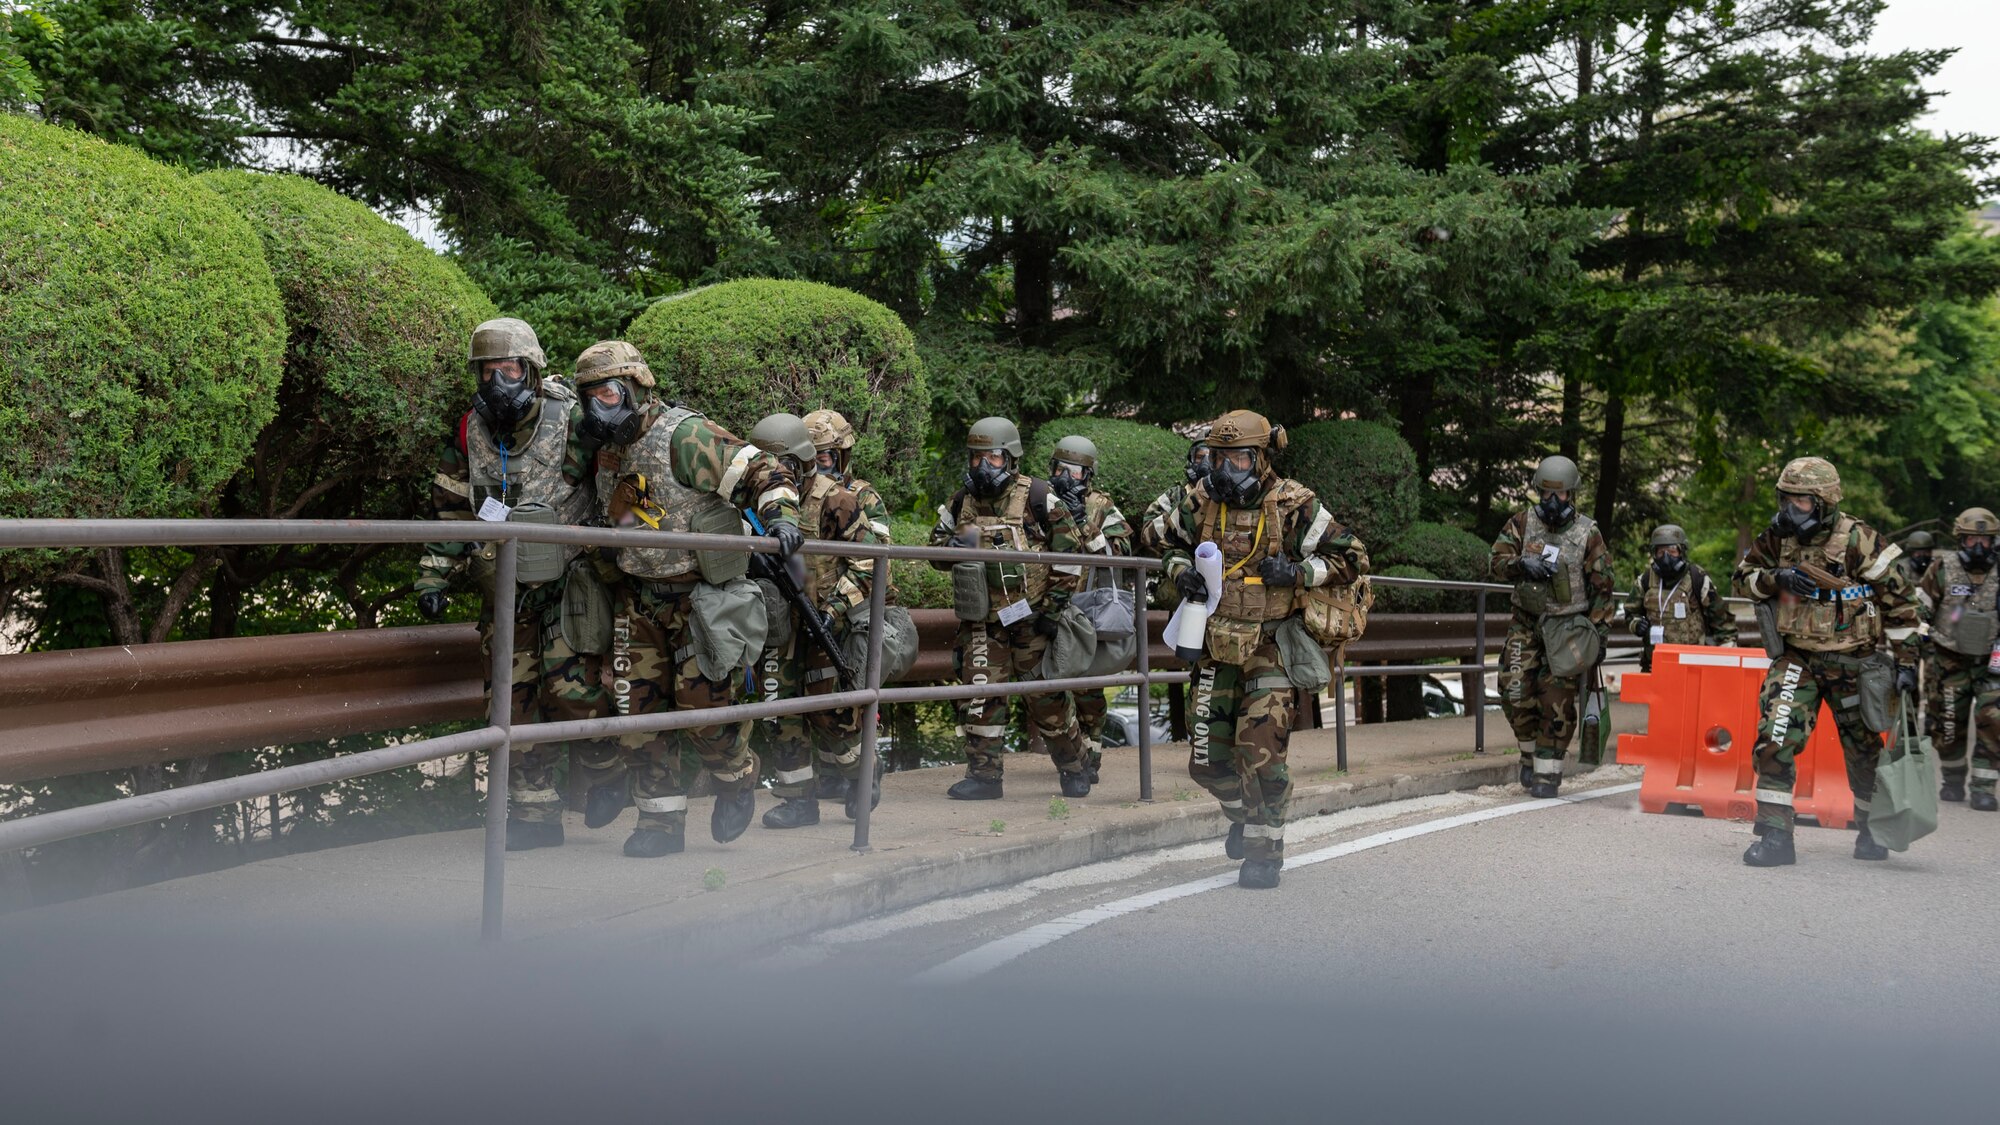 U.S. Air Force Airmen assigned to the 51st Fighter Wing conduct a “bug out” and move locations while in mission-oriented protective posture level four during Beverly Herd 24-1 at Osan Air Base, Republic of Korea, May 15, 2024. The training entailed members to evacuate their worksite, set up a temporary alternate location, and maintain the capability to maintain control of the central hub for wing-level situational awareness through all avenues. Routine training events like Beverly Herd are pivotal platforms for 51st Fighter Wing Airmen to refine their warfighting proficiencies through practical application, concurrently enhancing their ability to respond skillfully to contingencies. (U.S. Air Force photo by Staff Sgt. Aubree Owens)